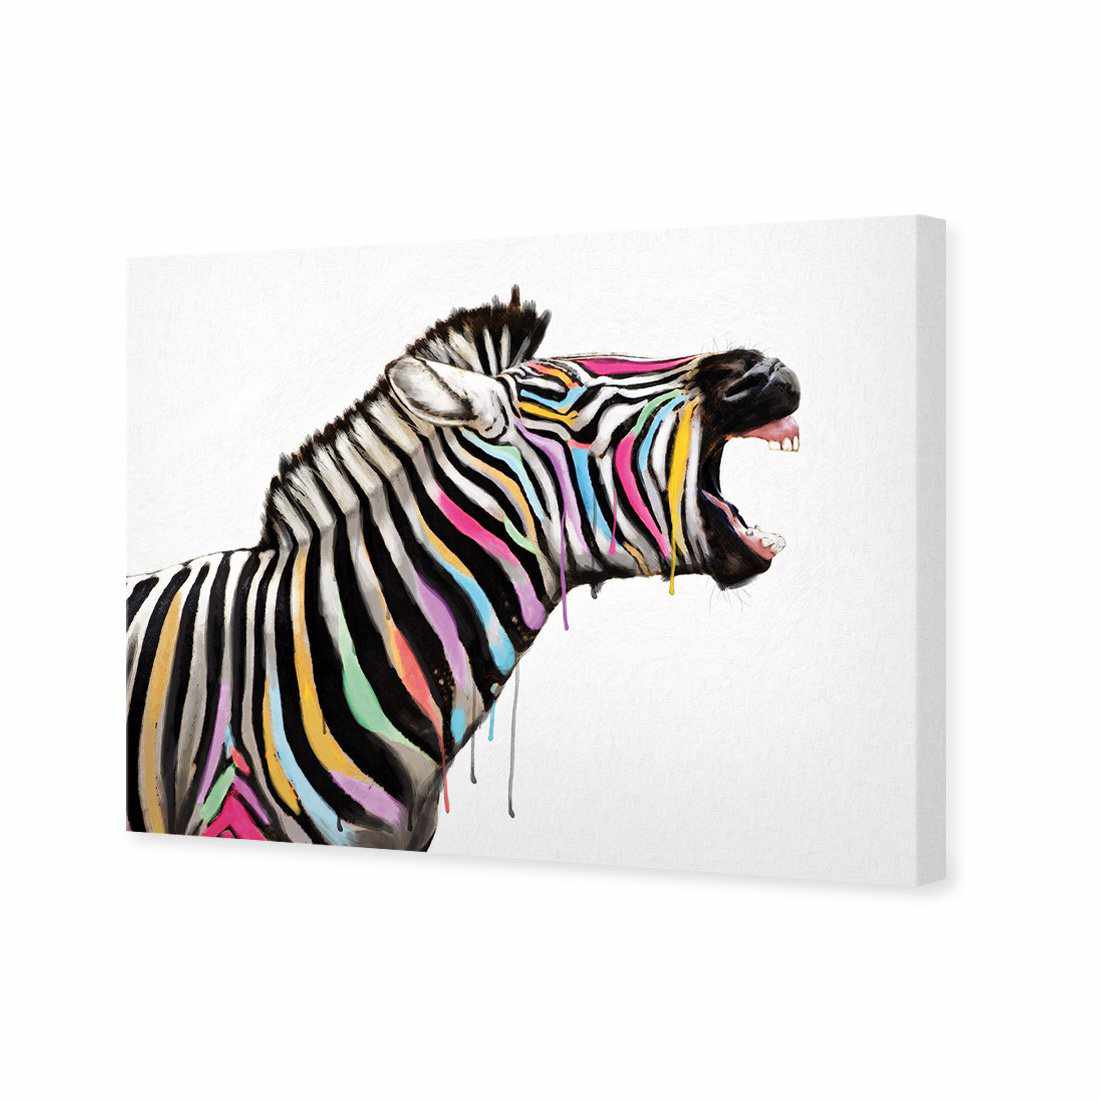 Laughing Stock Canvas Art-Canvas-Wall Art Designs-45x30cm-Canvas - No Frame-Wall Art Designs